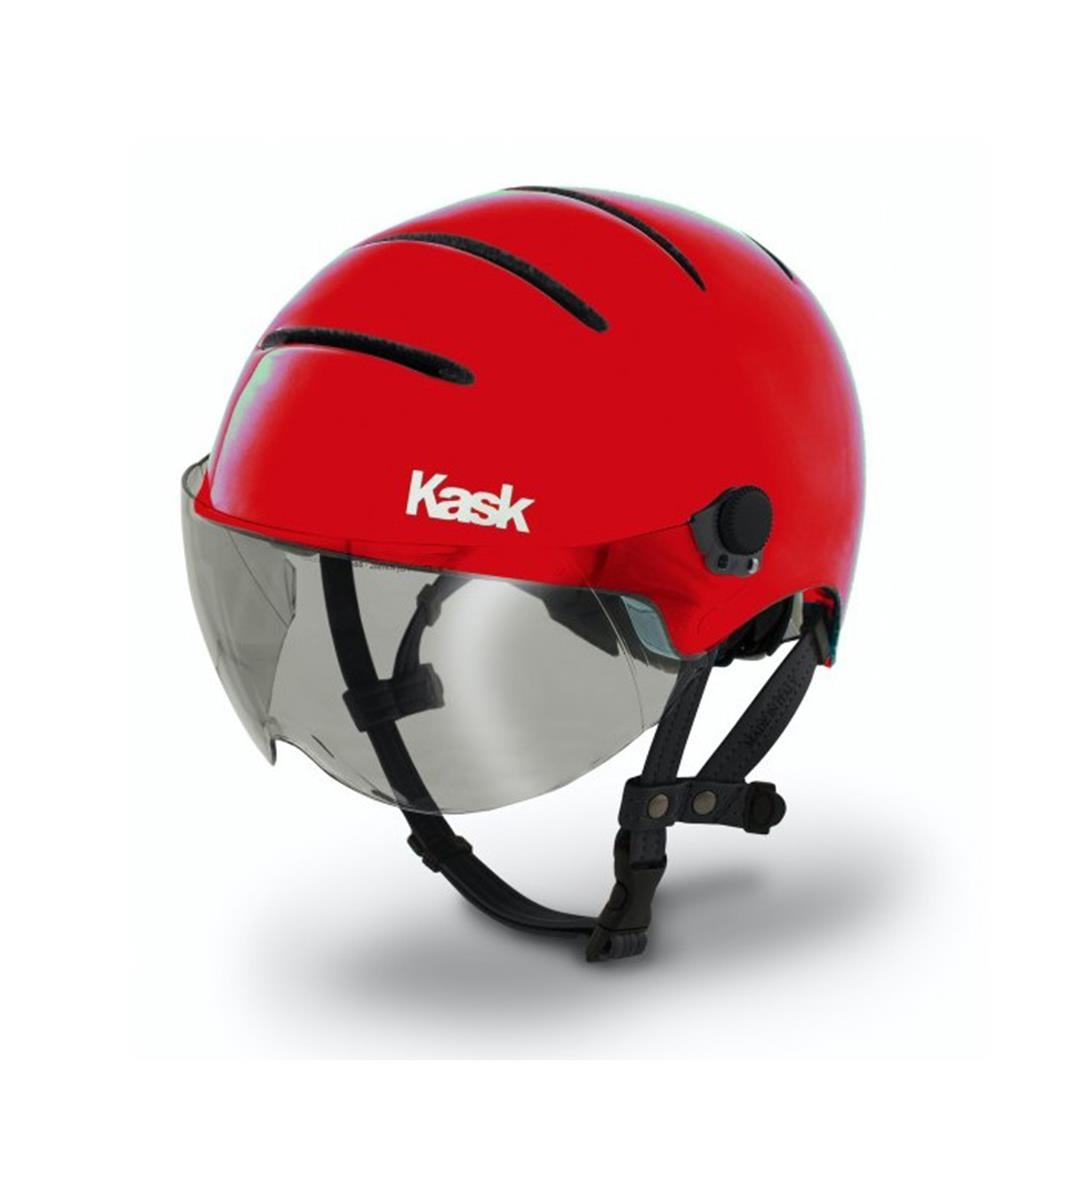 Kask Lifistyle Red